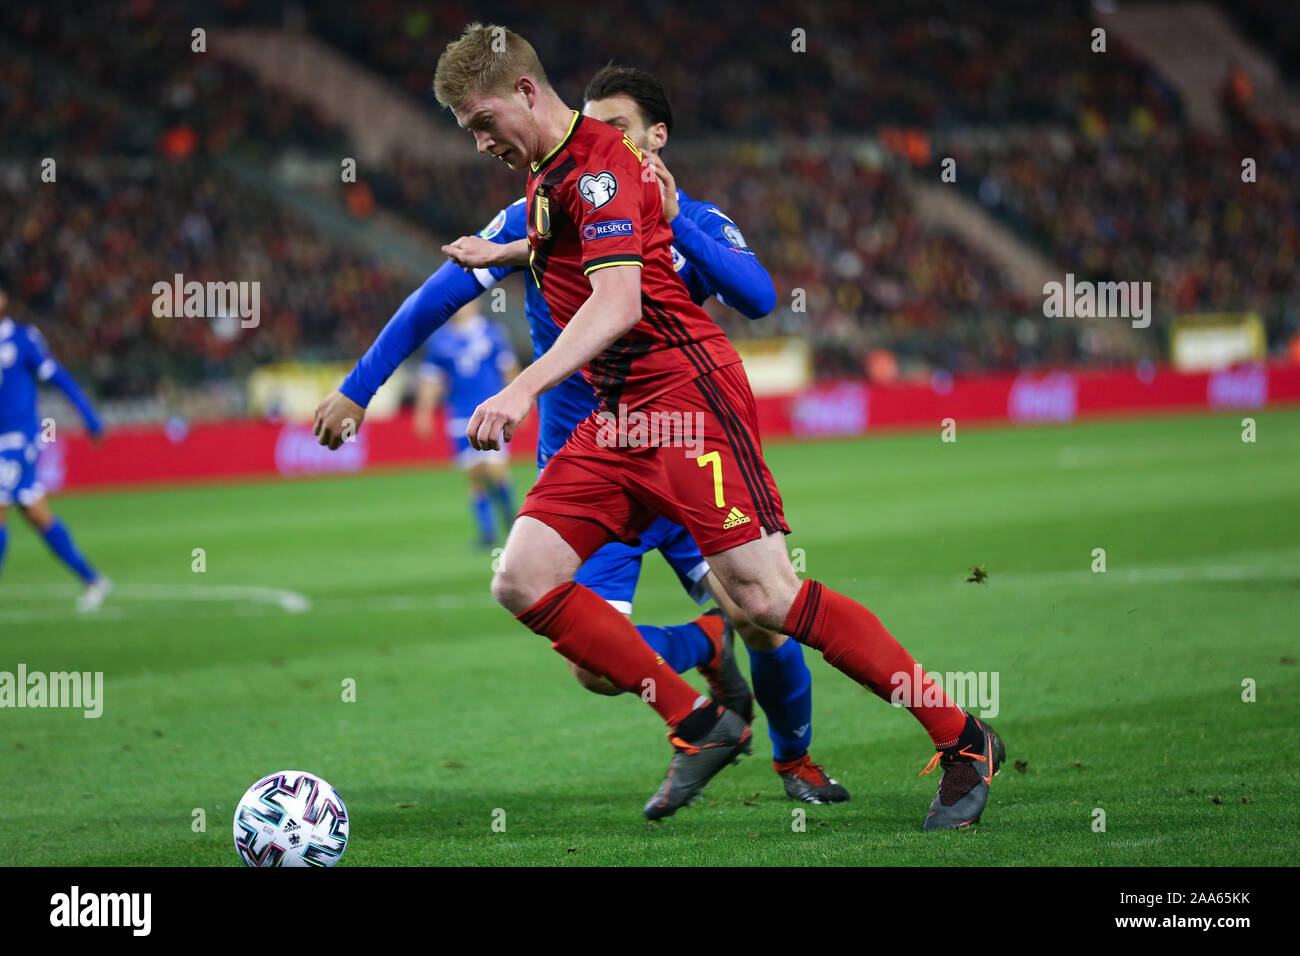 Brussels, Belgium. 19th Nov, 2019. Kevin De Bruyne of Belgium (Front) competes during a UEFA Euro 2020 group I qualifying match between Belgium and Cyprus in Brussels, Belgium, Nov. 19, 2019. Credit: Zhang Cheng/Xinhua/Alamy Live News Stock Photo